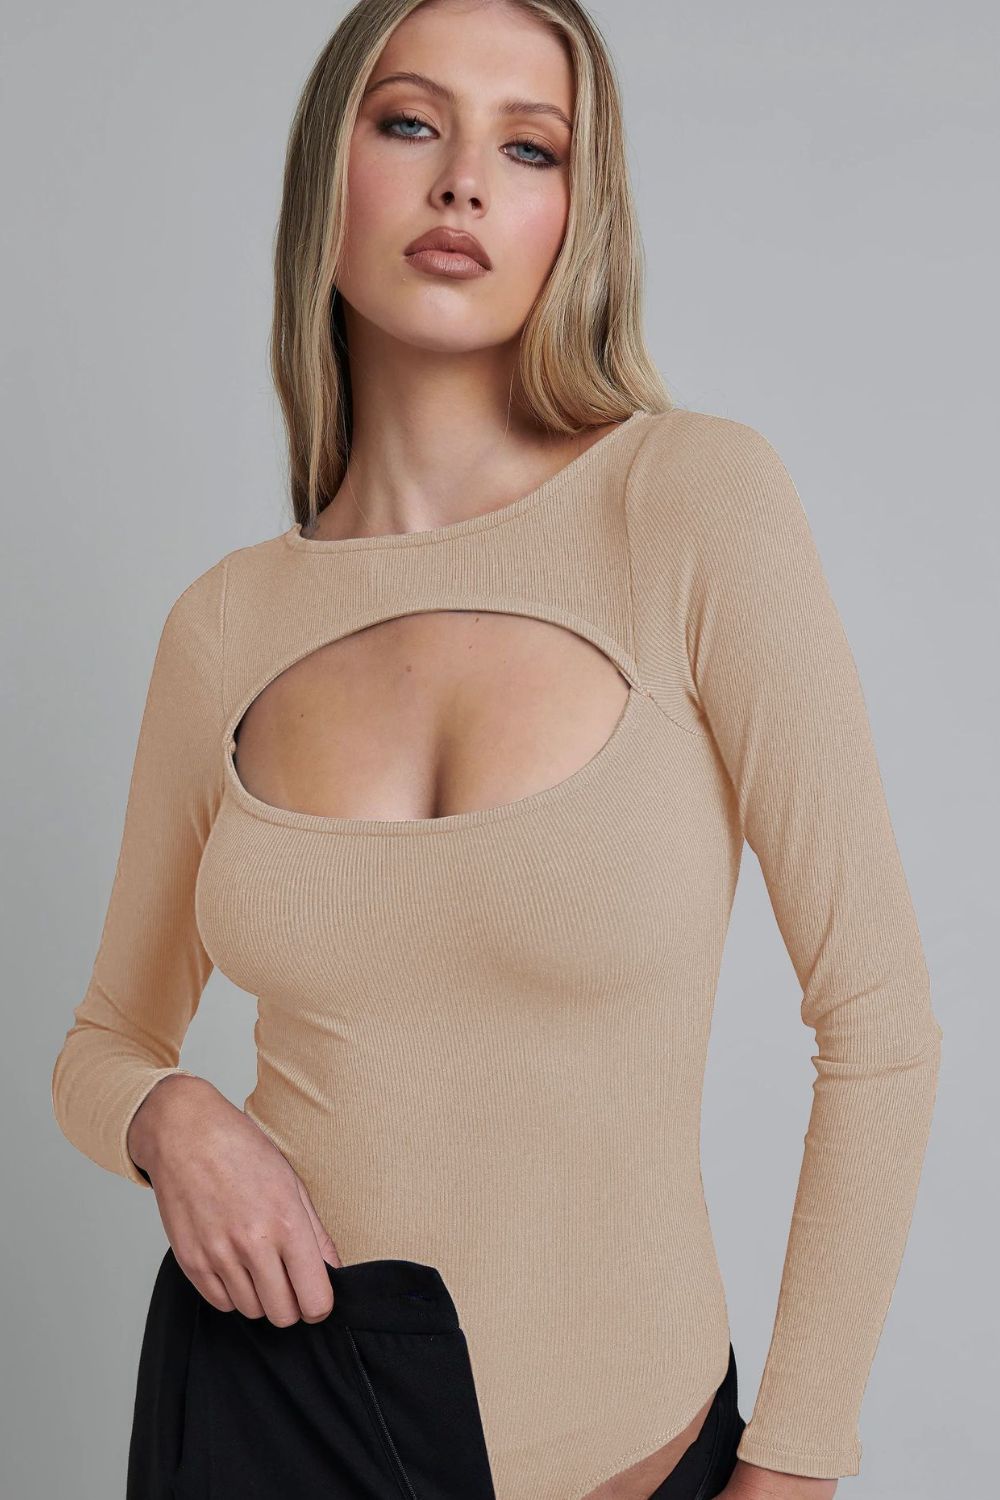 Cutout Ribbed Long Sleeve Bodysuit - Brown / S - Women’s Clothing & Accessories - Shirts & Tops - 5 - 2024